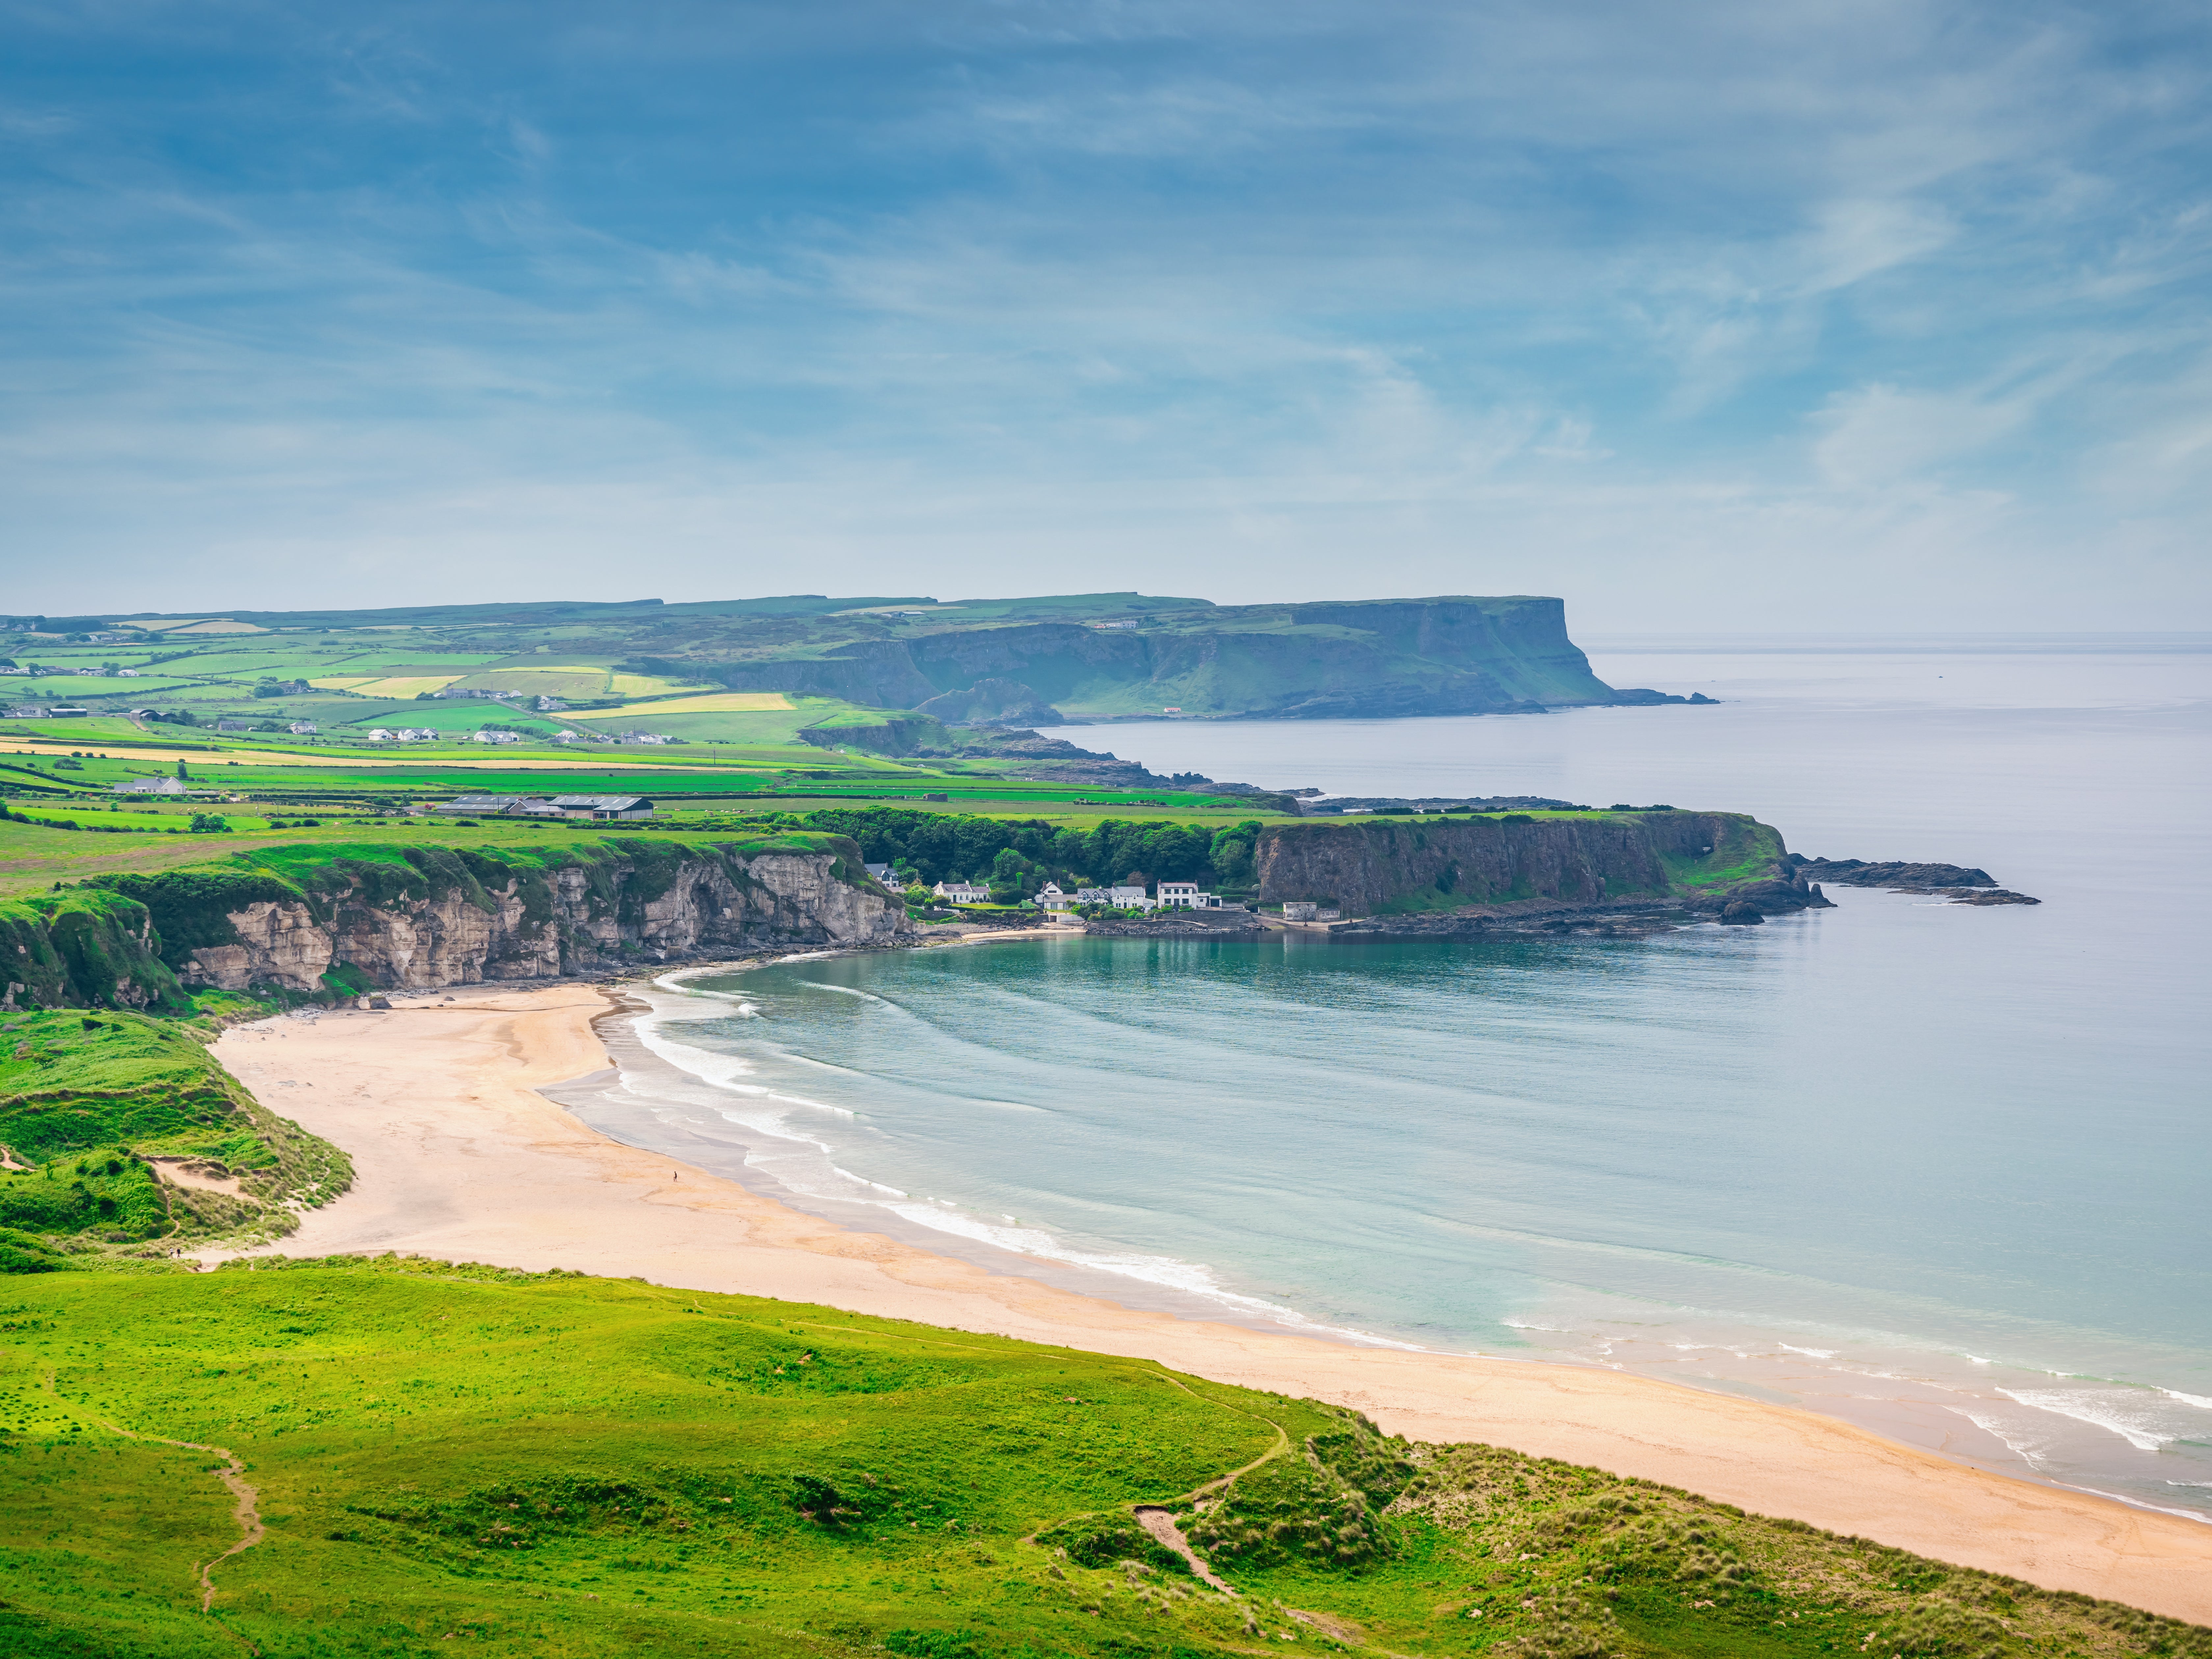 The landscape of White Park Bay took shape between 200 million and 50 million years ago